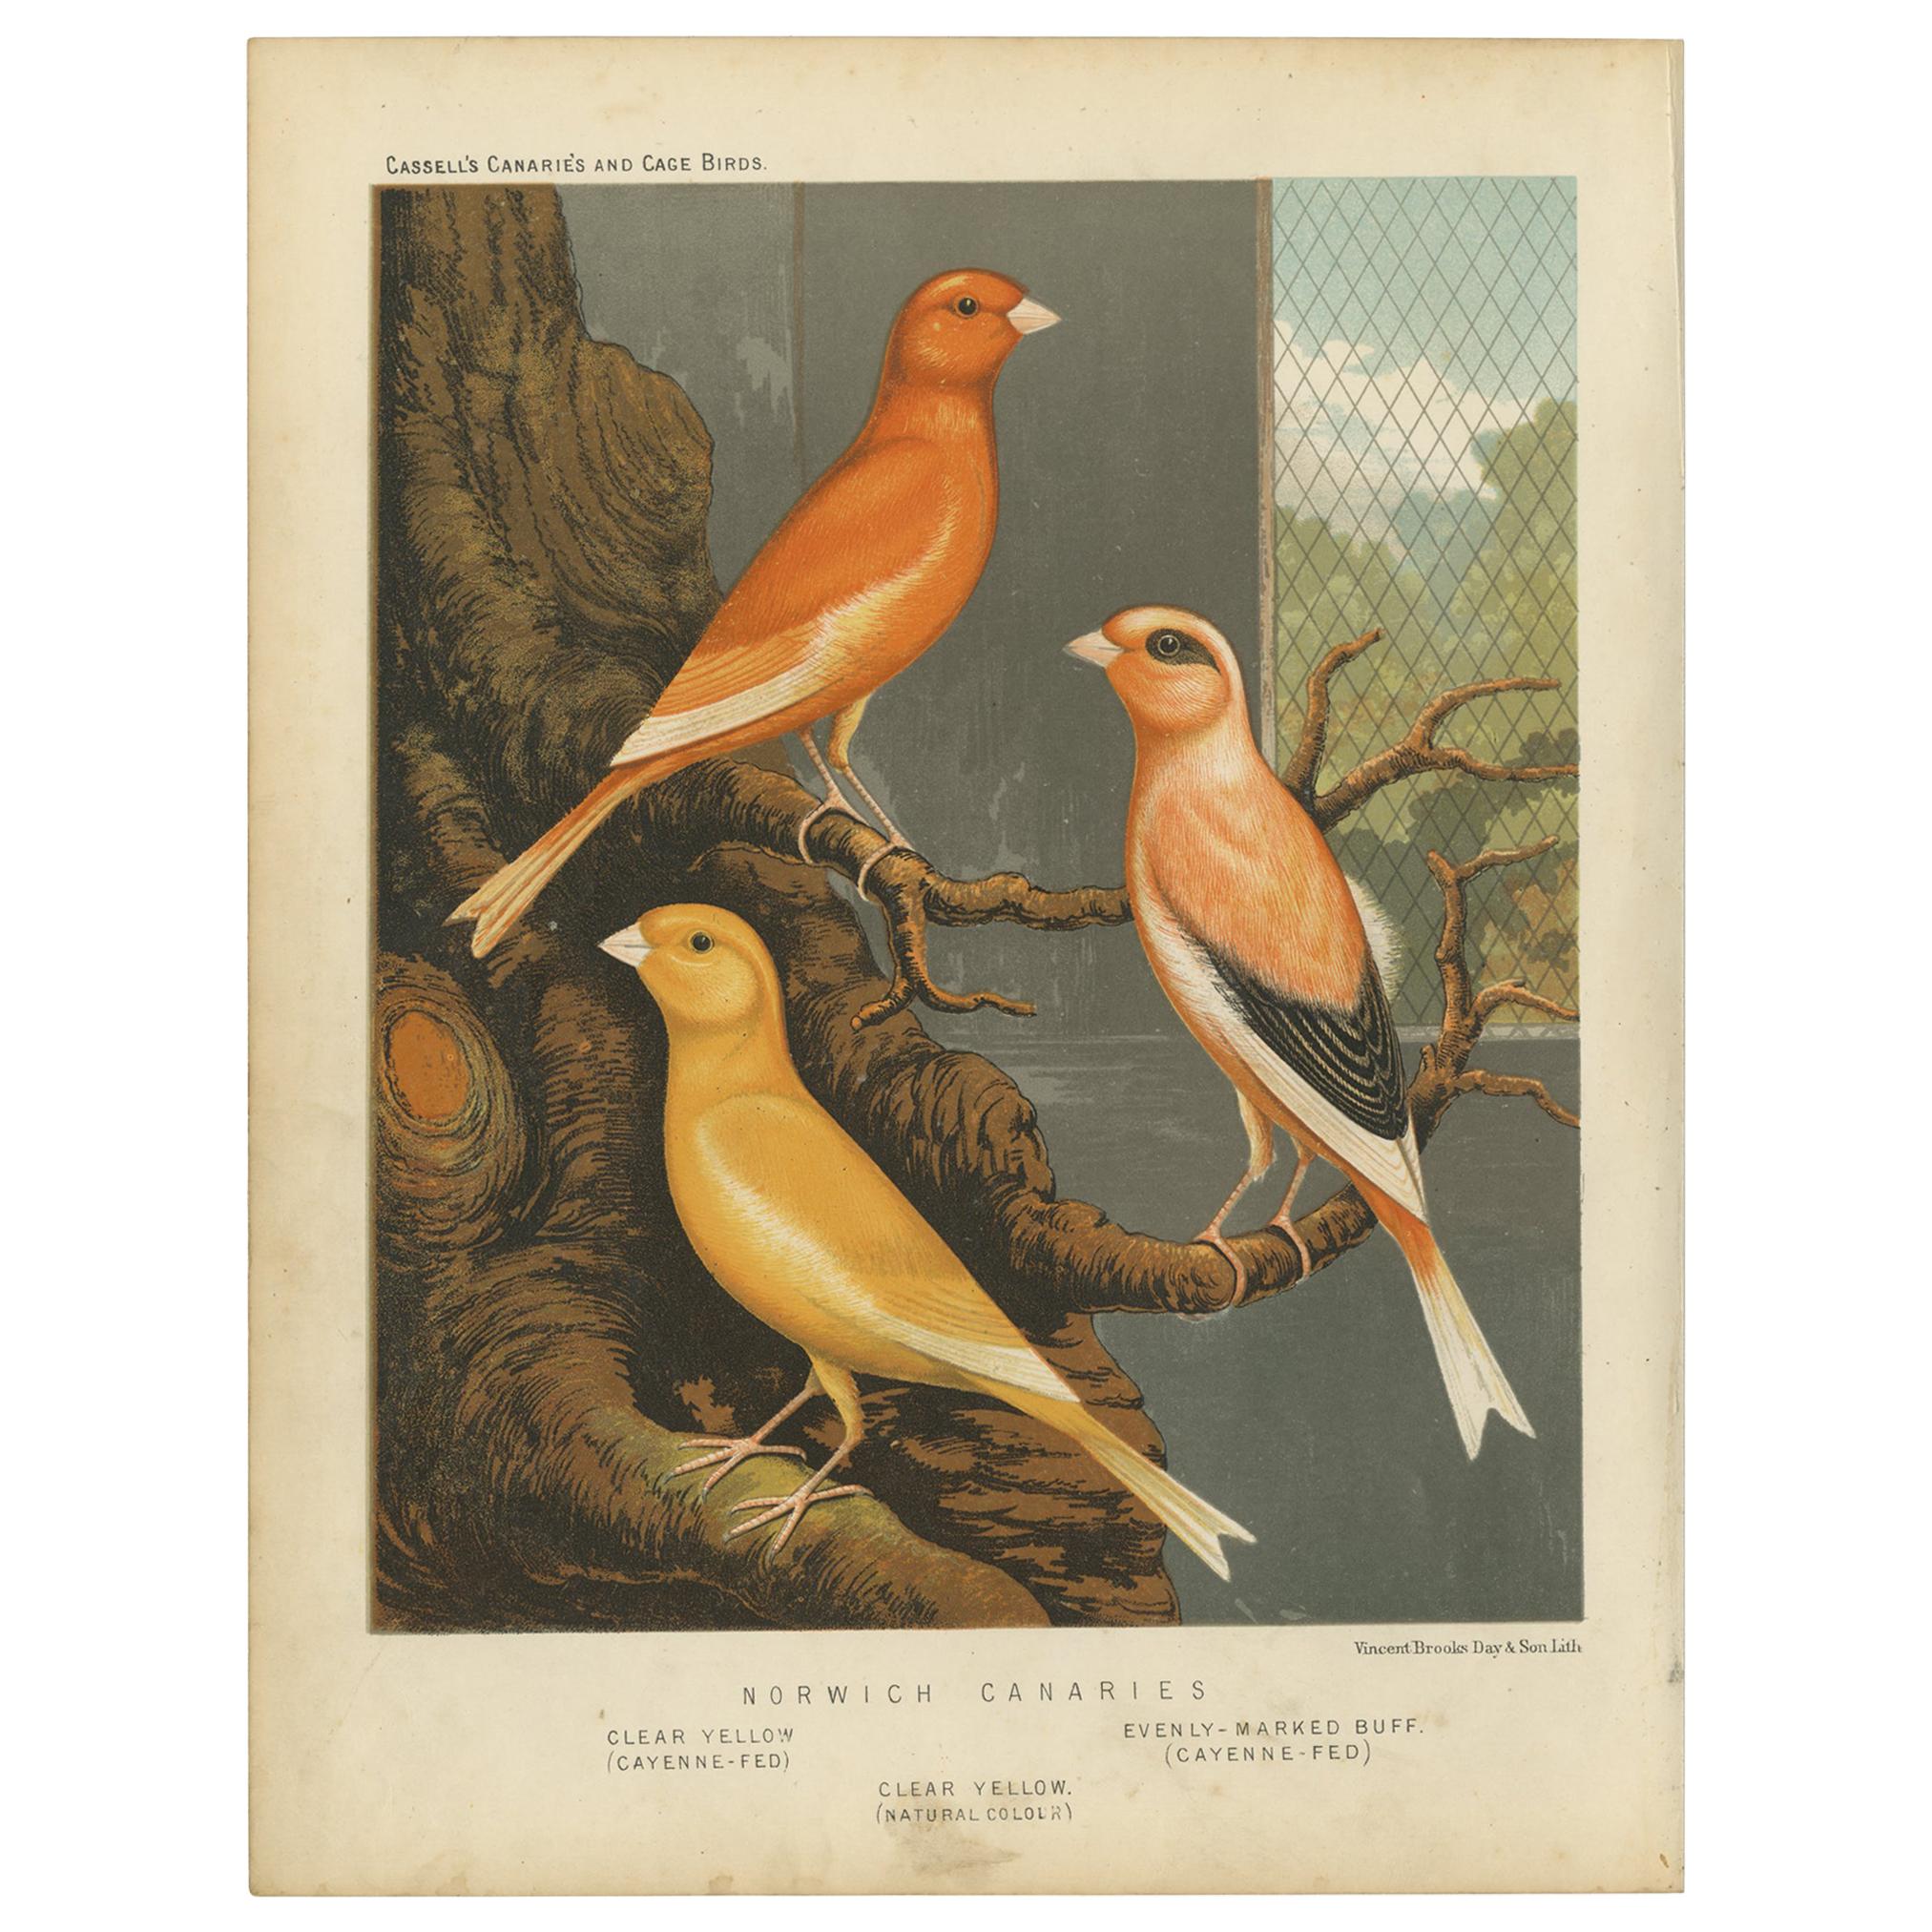 Antique Bird Print of the Norwich Canaries Clear Yellow 'Cayanne-Fed' and Other